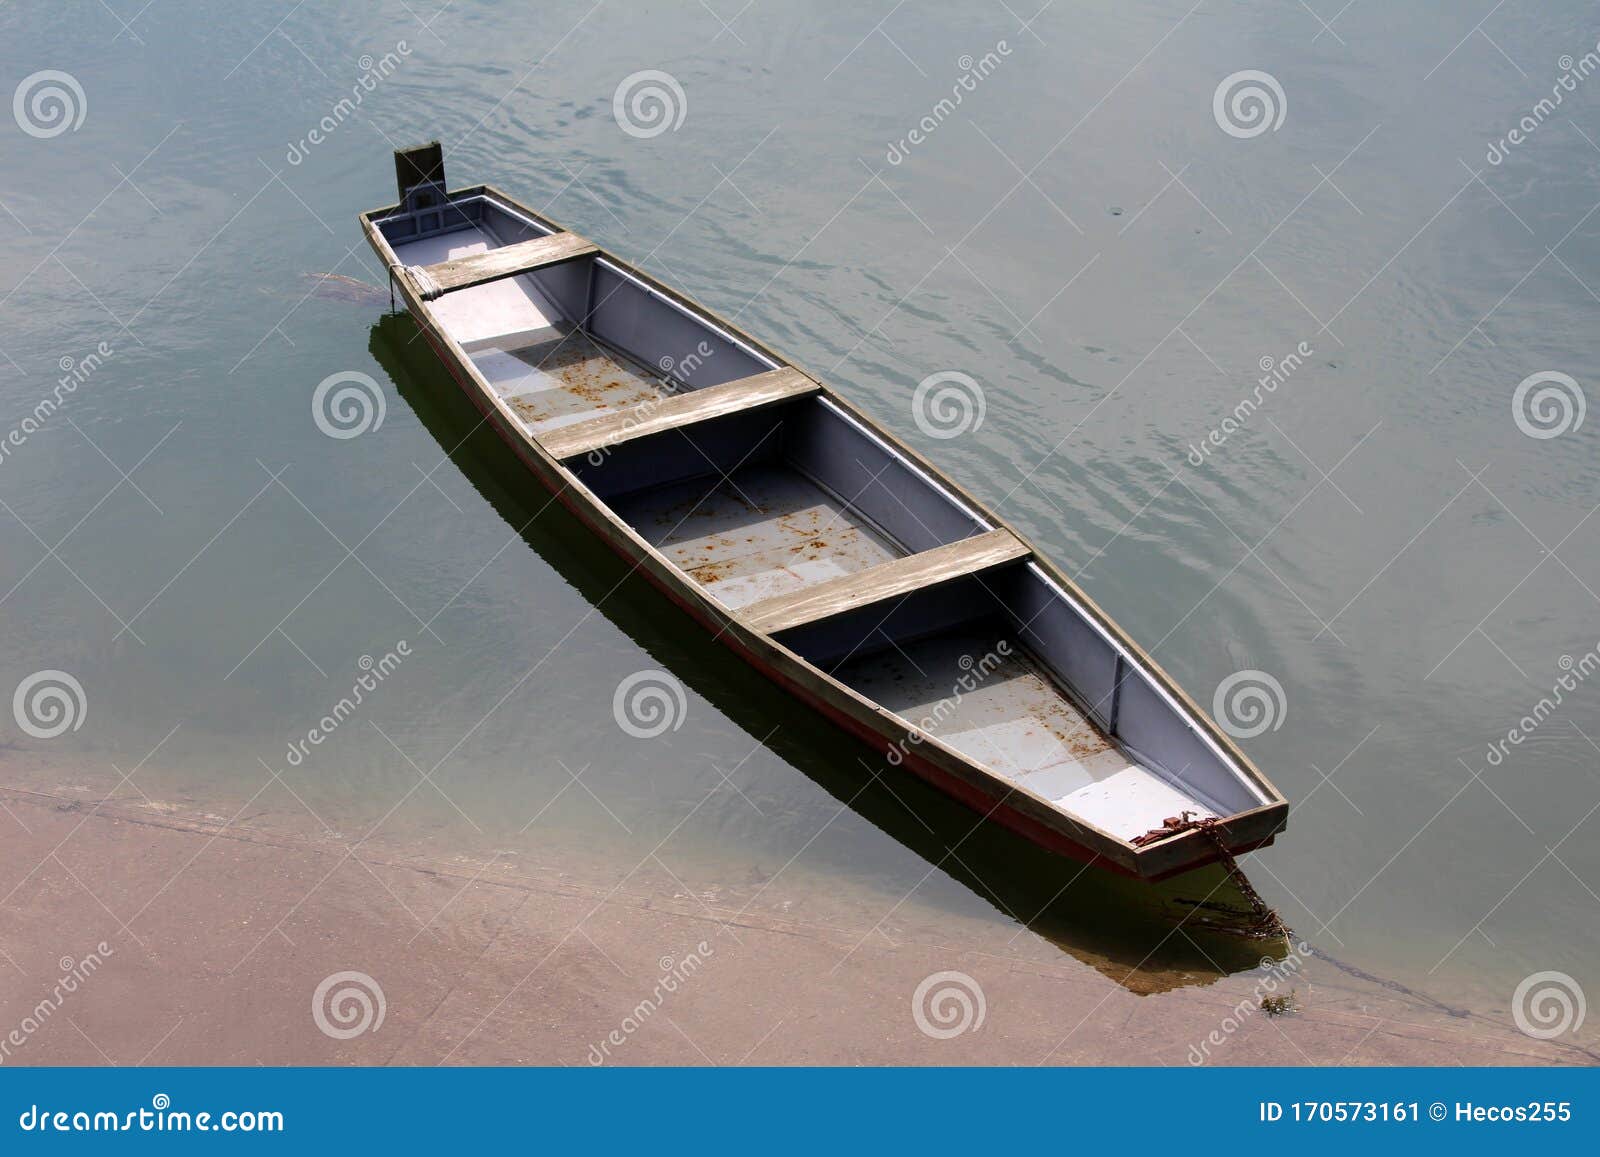 https://thumbs.dreamstime.com/z/wooden-river-boat-made-dilapidated-boards-grey-metal-parts-tied-to-concrete-bank-strong-rusted-chain-170573161.jpg